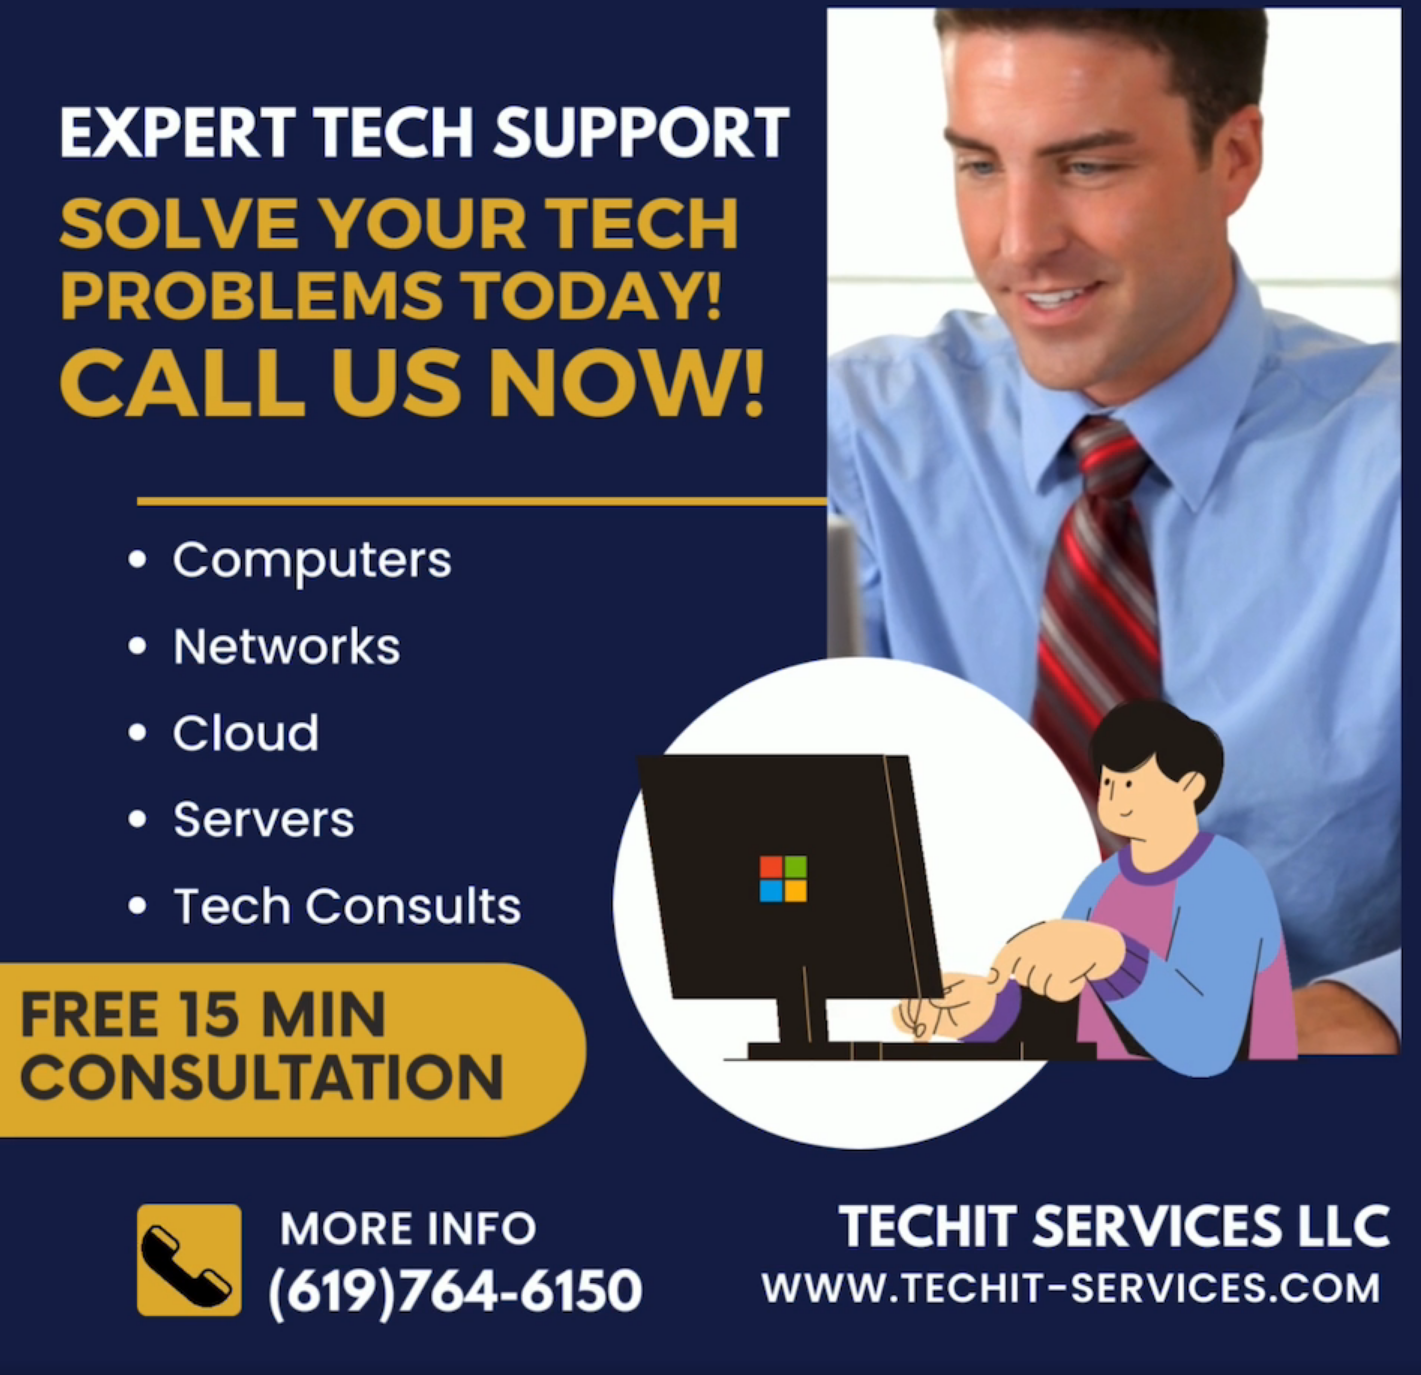 Expert Tech Support Solve Your Tech Problems Today! Call us now!